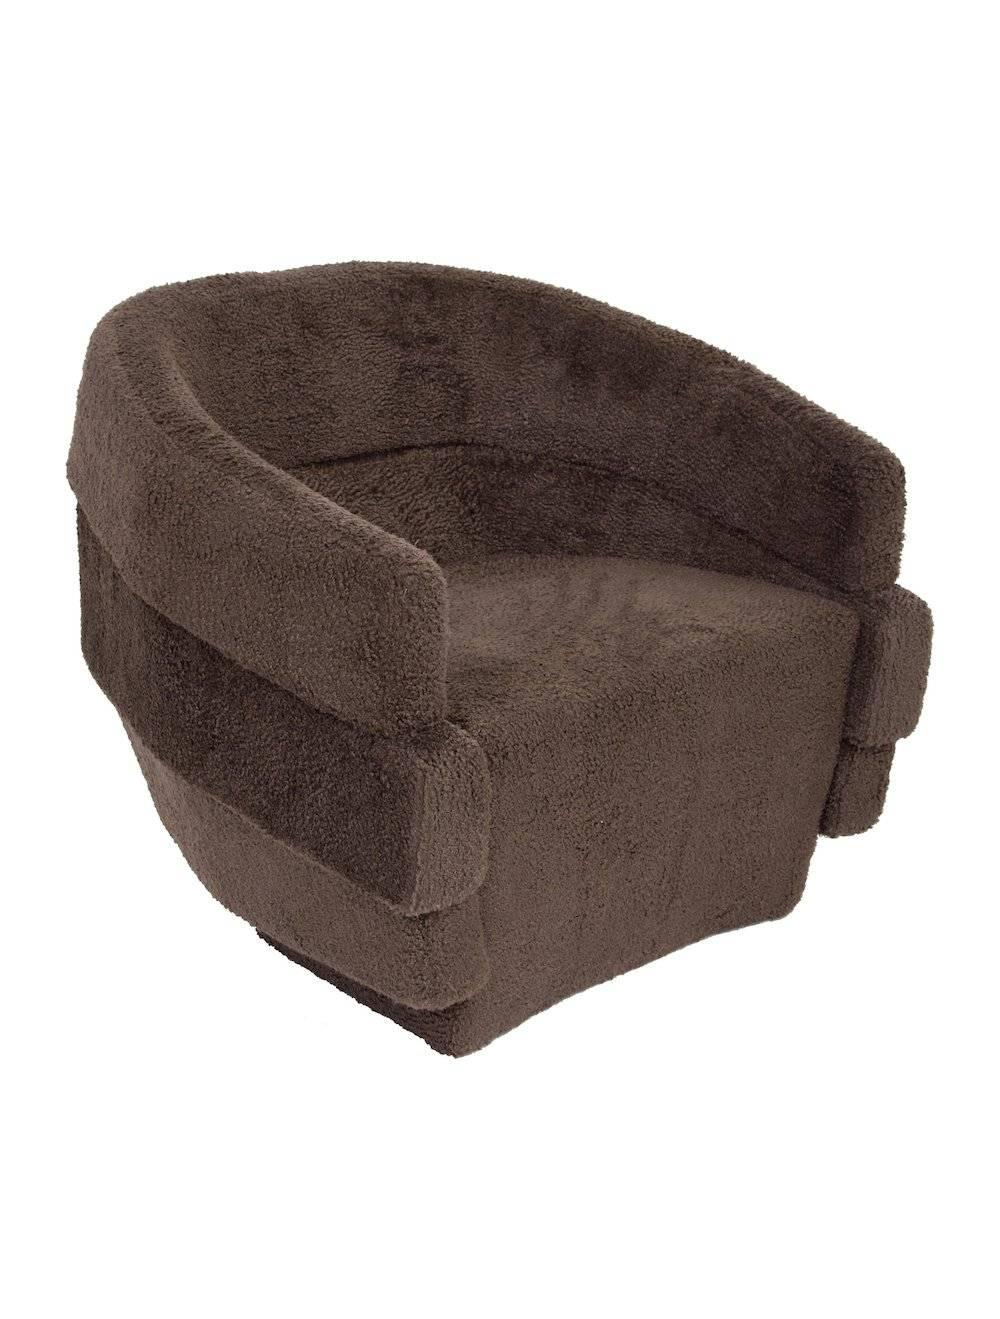 Rift Large Armchair by Patricia Urquiola for Moroso in Fabric or Leather For Sale 7